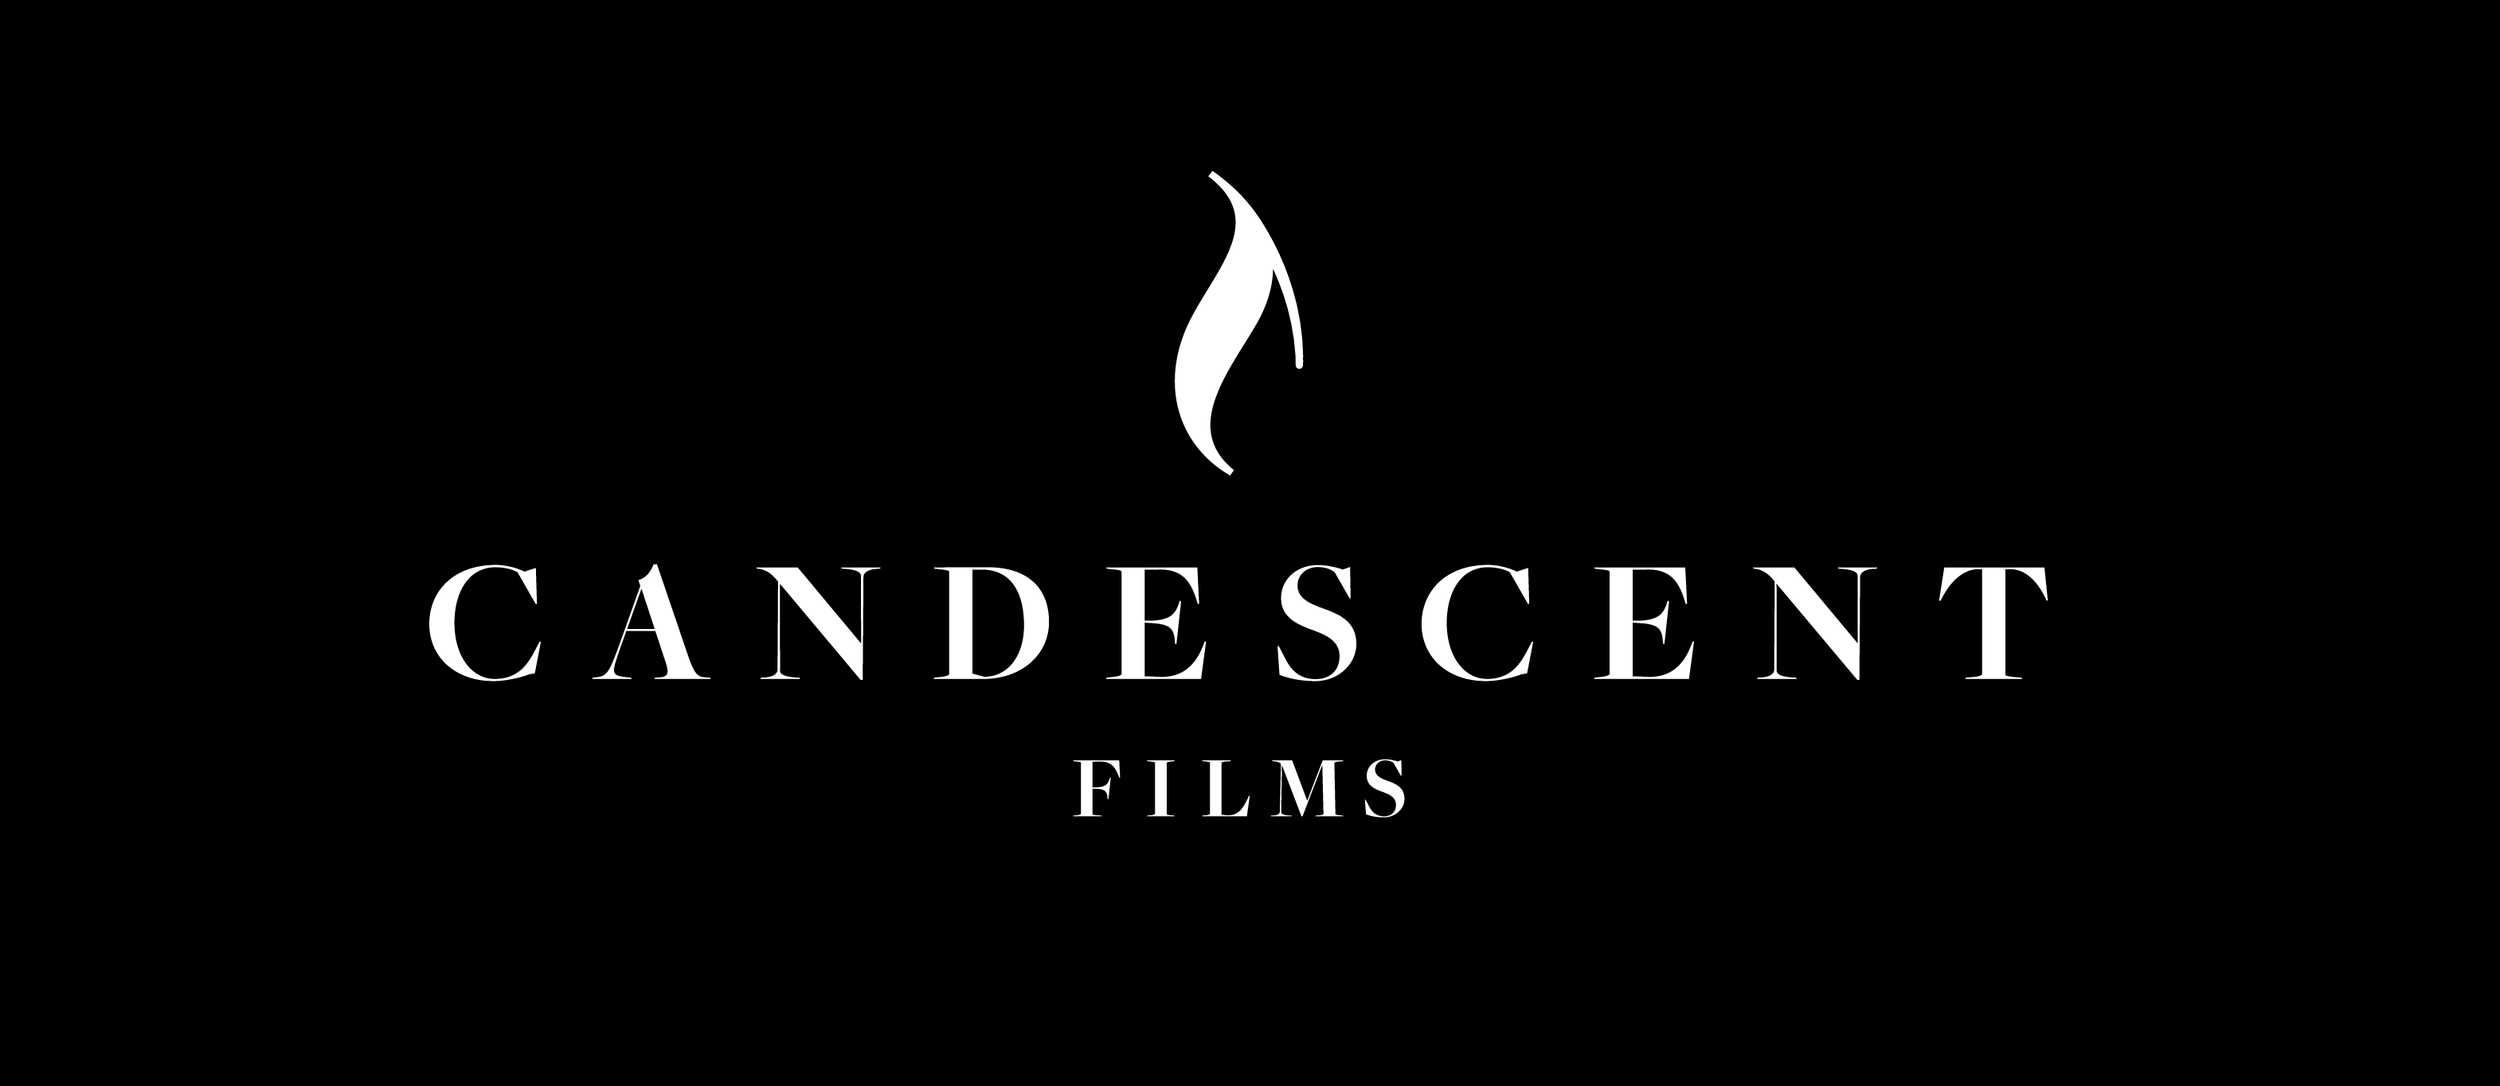 (preview)Candescent_logo_bold_white_black background.png